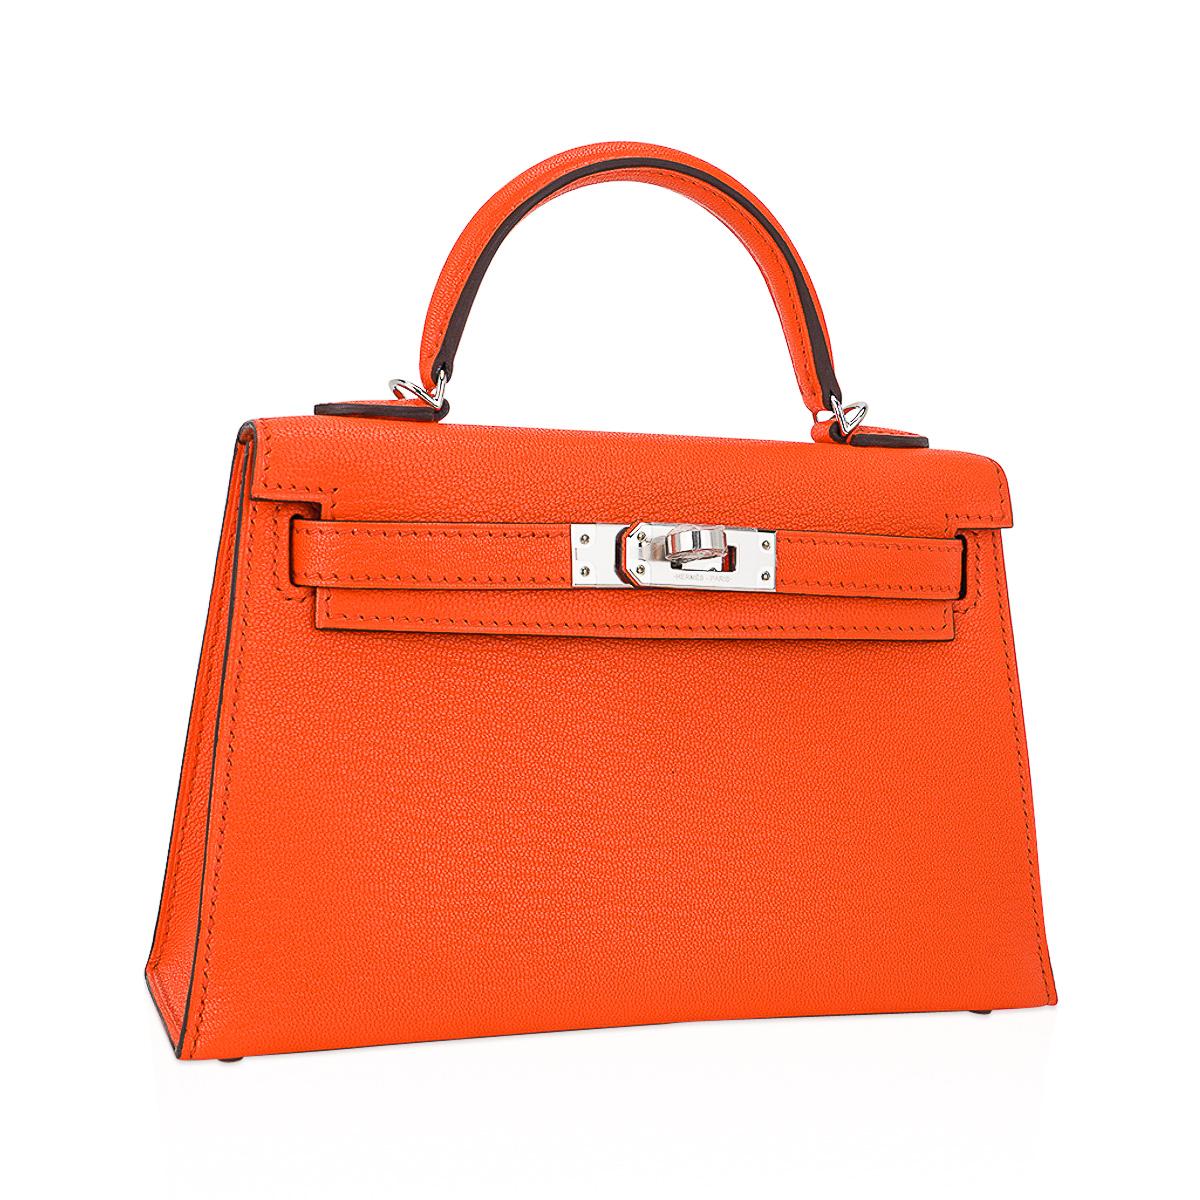 Mightychic offers an Guaranteed authentic Hermes Kelly 20 mini Sellier Verso bag featured in Feu and Terre Battue interior.
A fabulous pop of colour that will be a statement colour this season.
Crisp with Palladium hardware.
Chevre leather has a